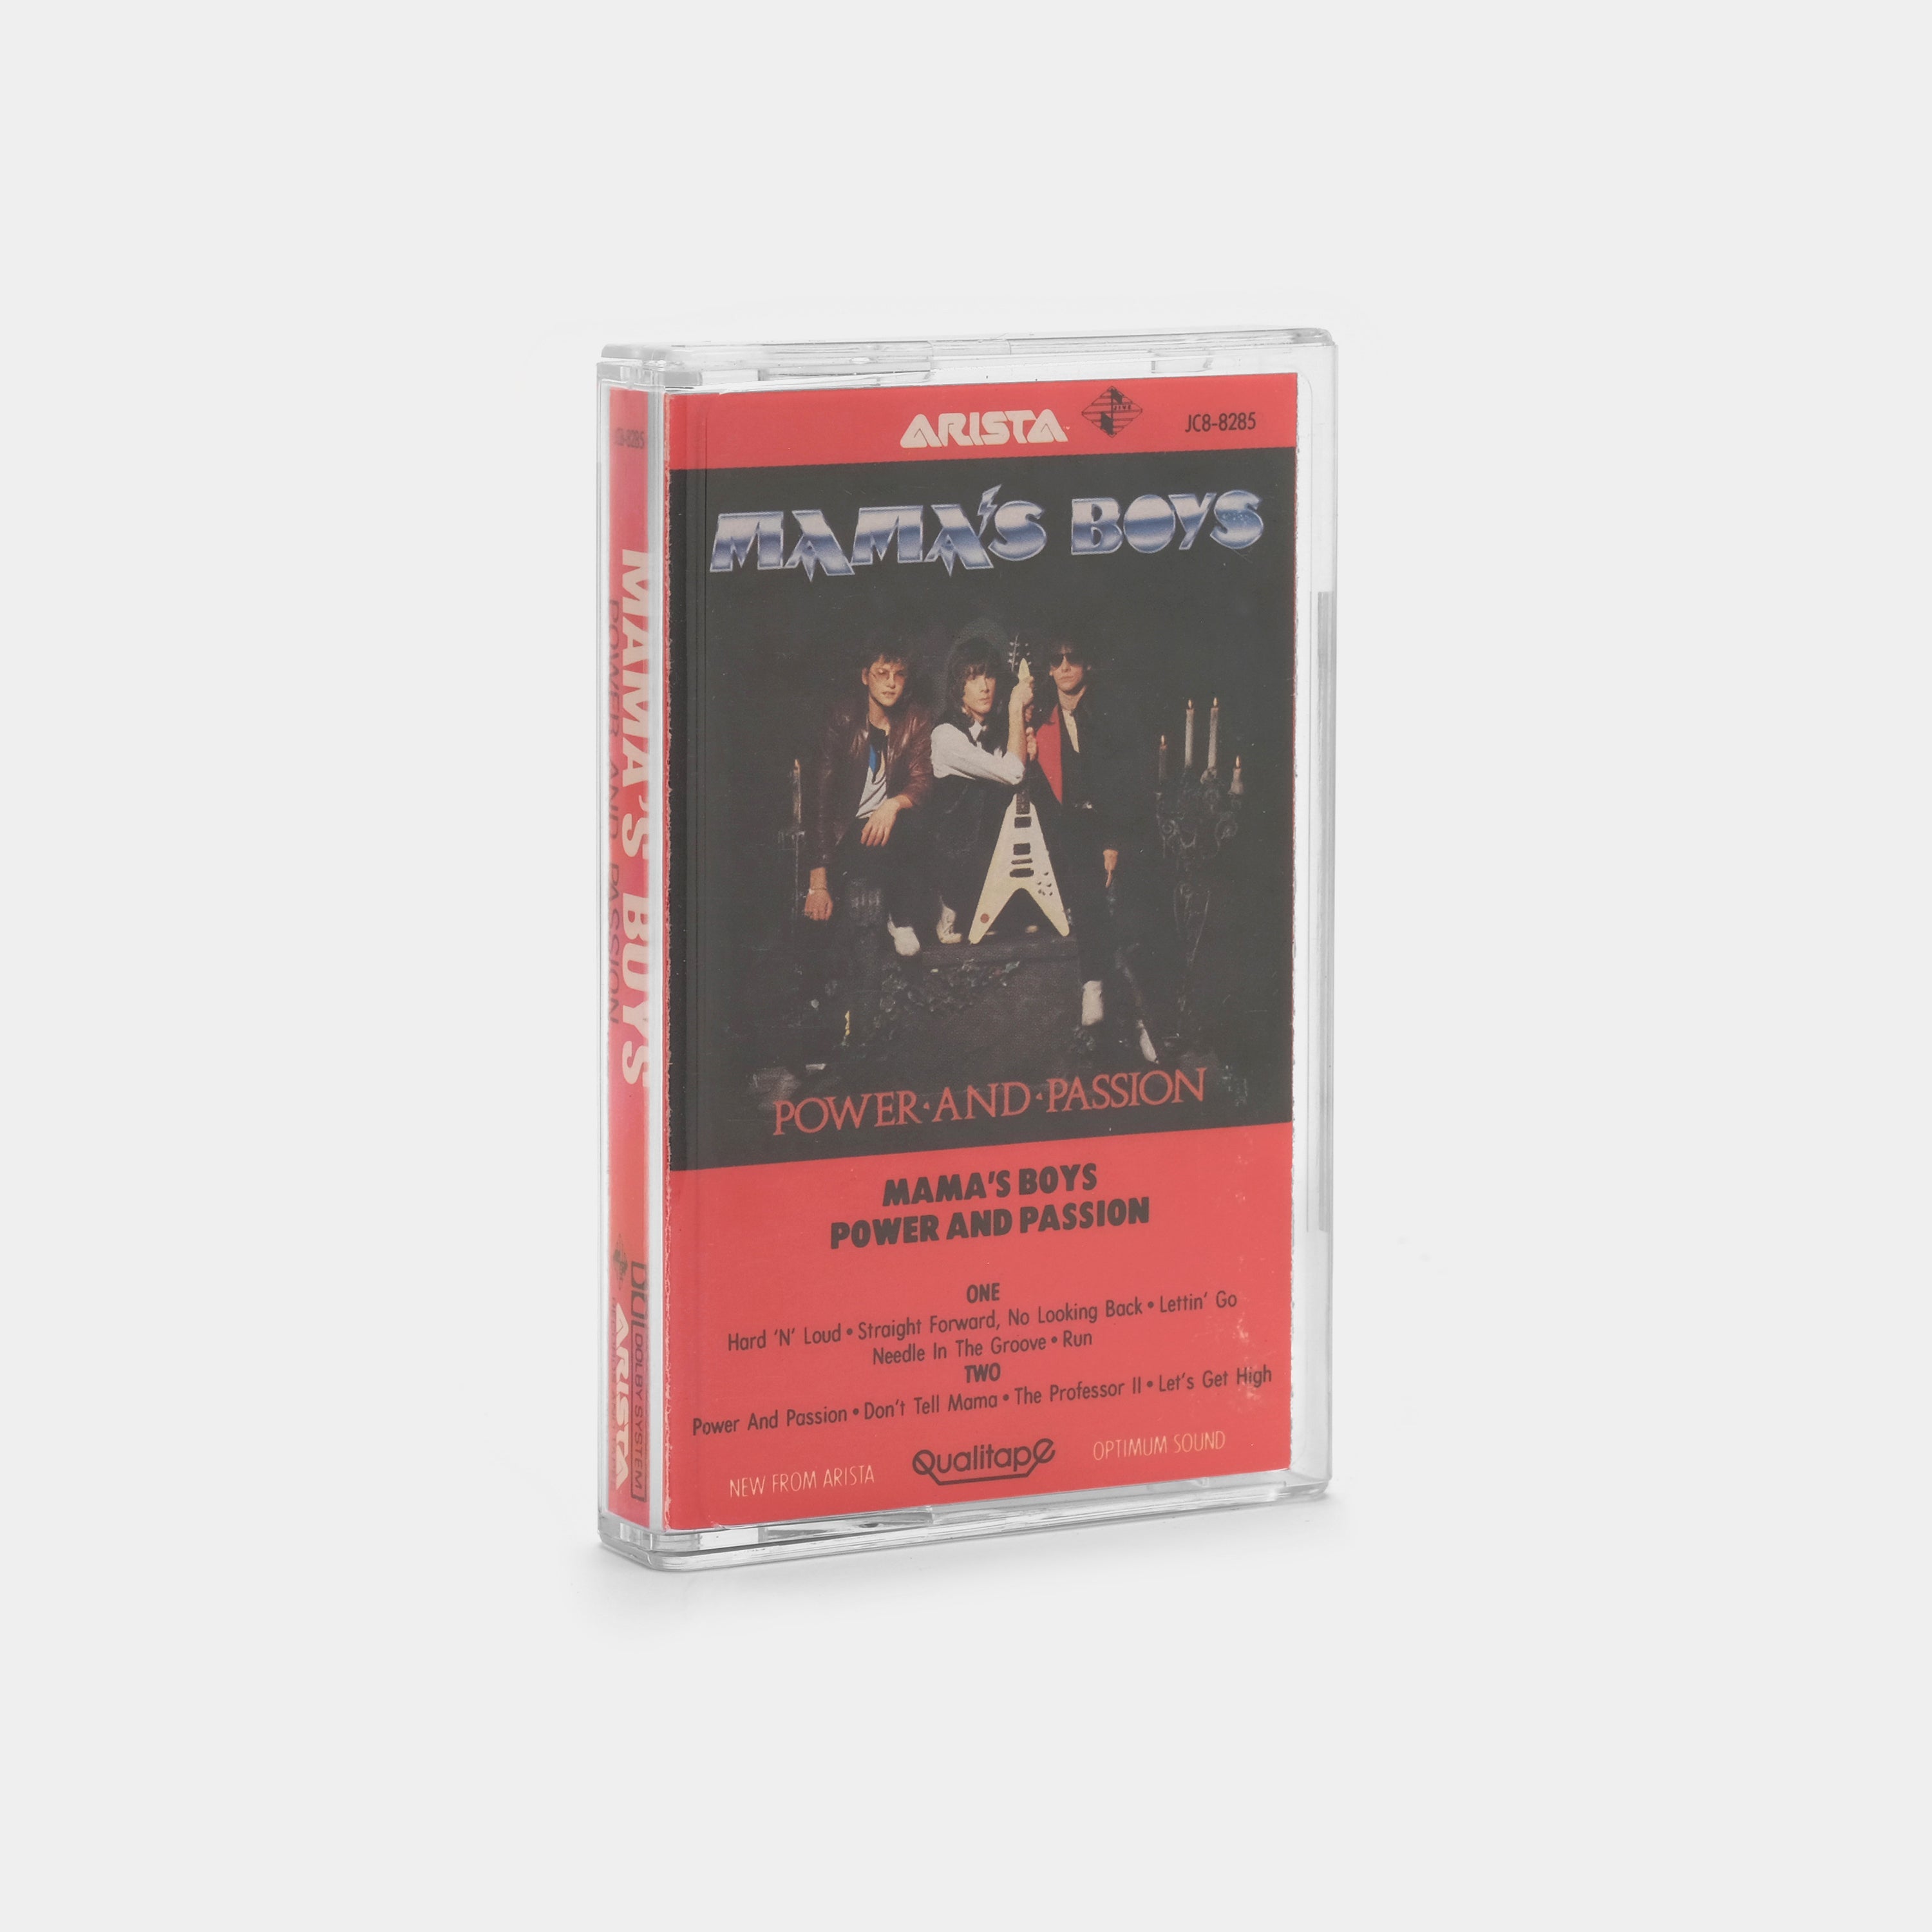 Mama's Boys - Power And Passion Cassette Tape